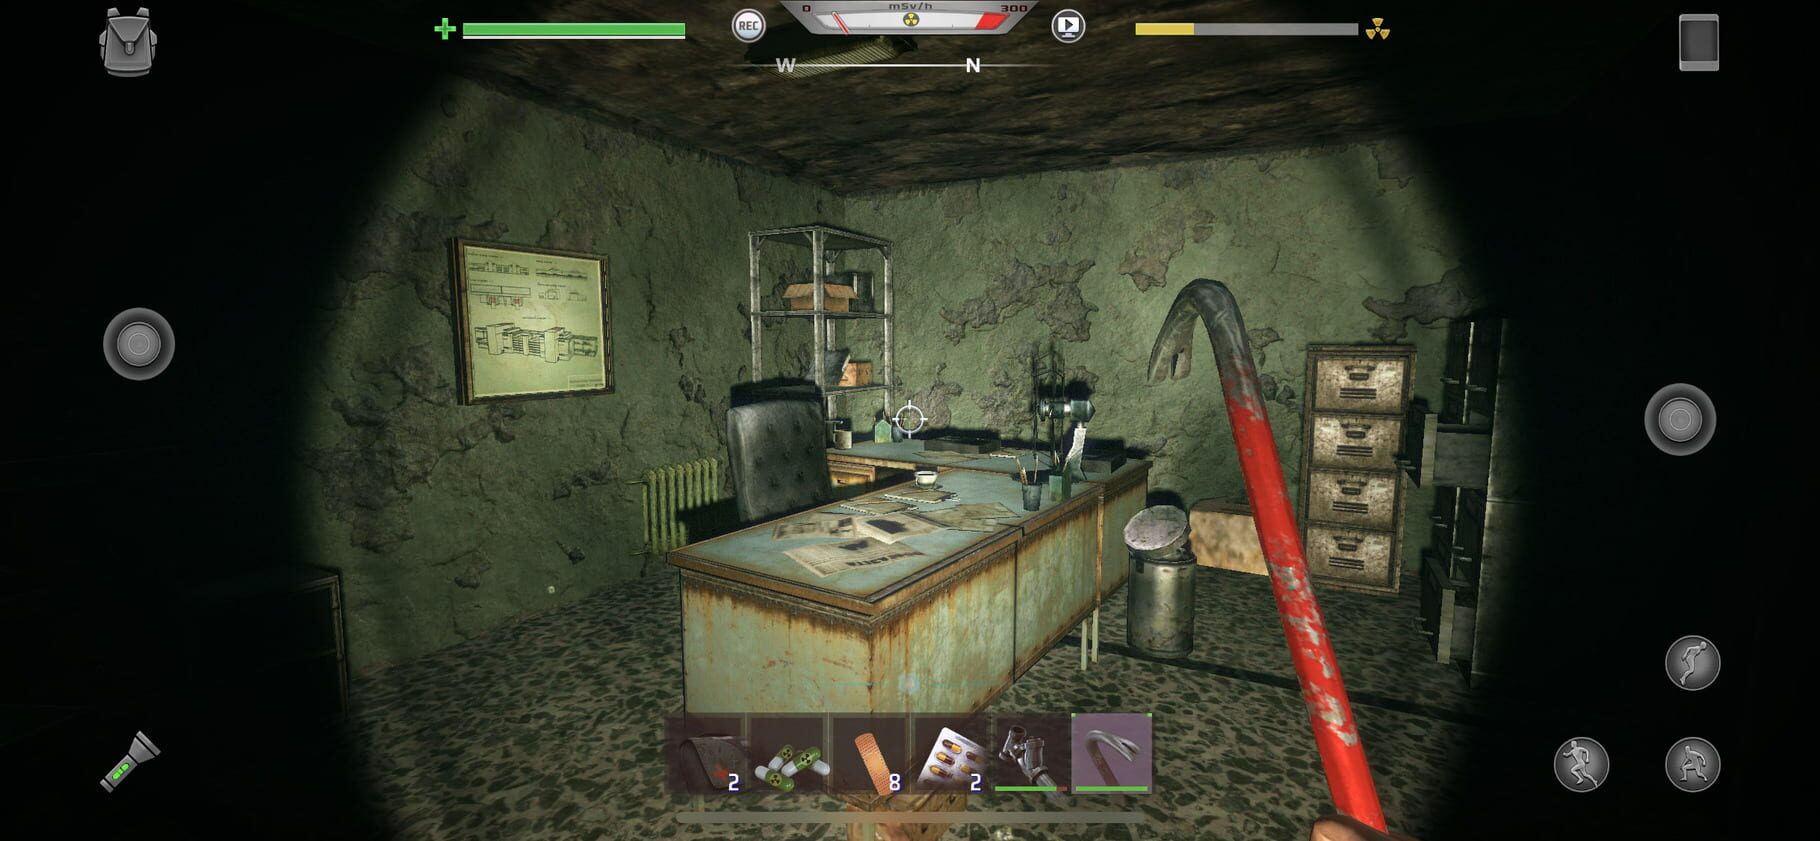 Escape from Chernobyl screenshots